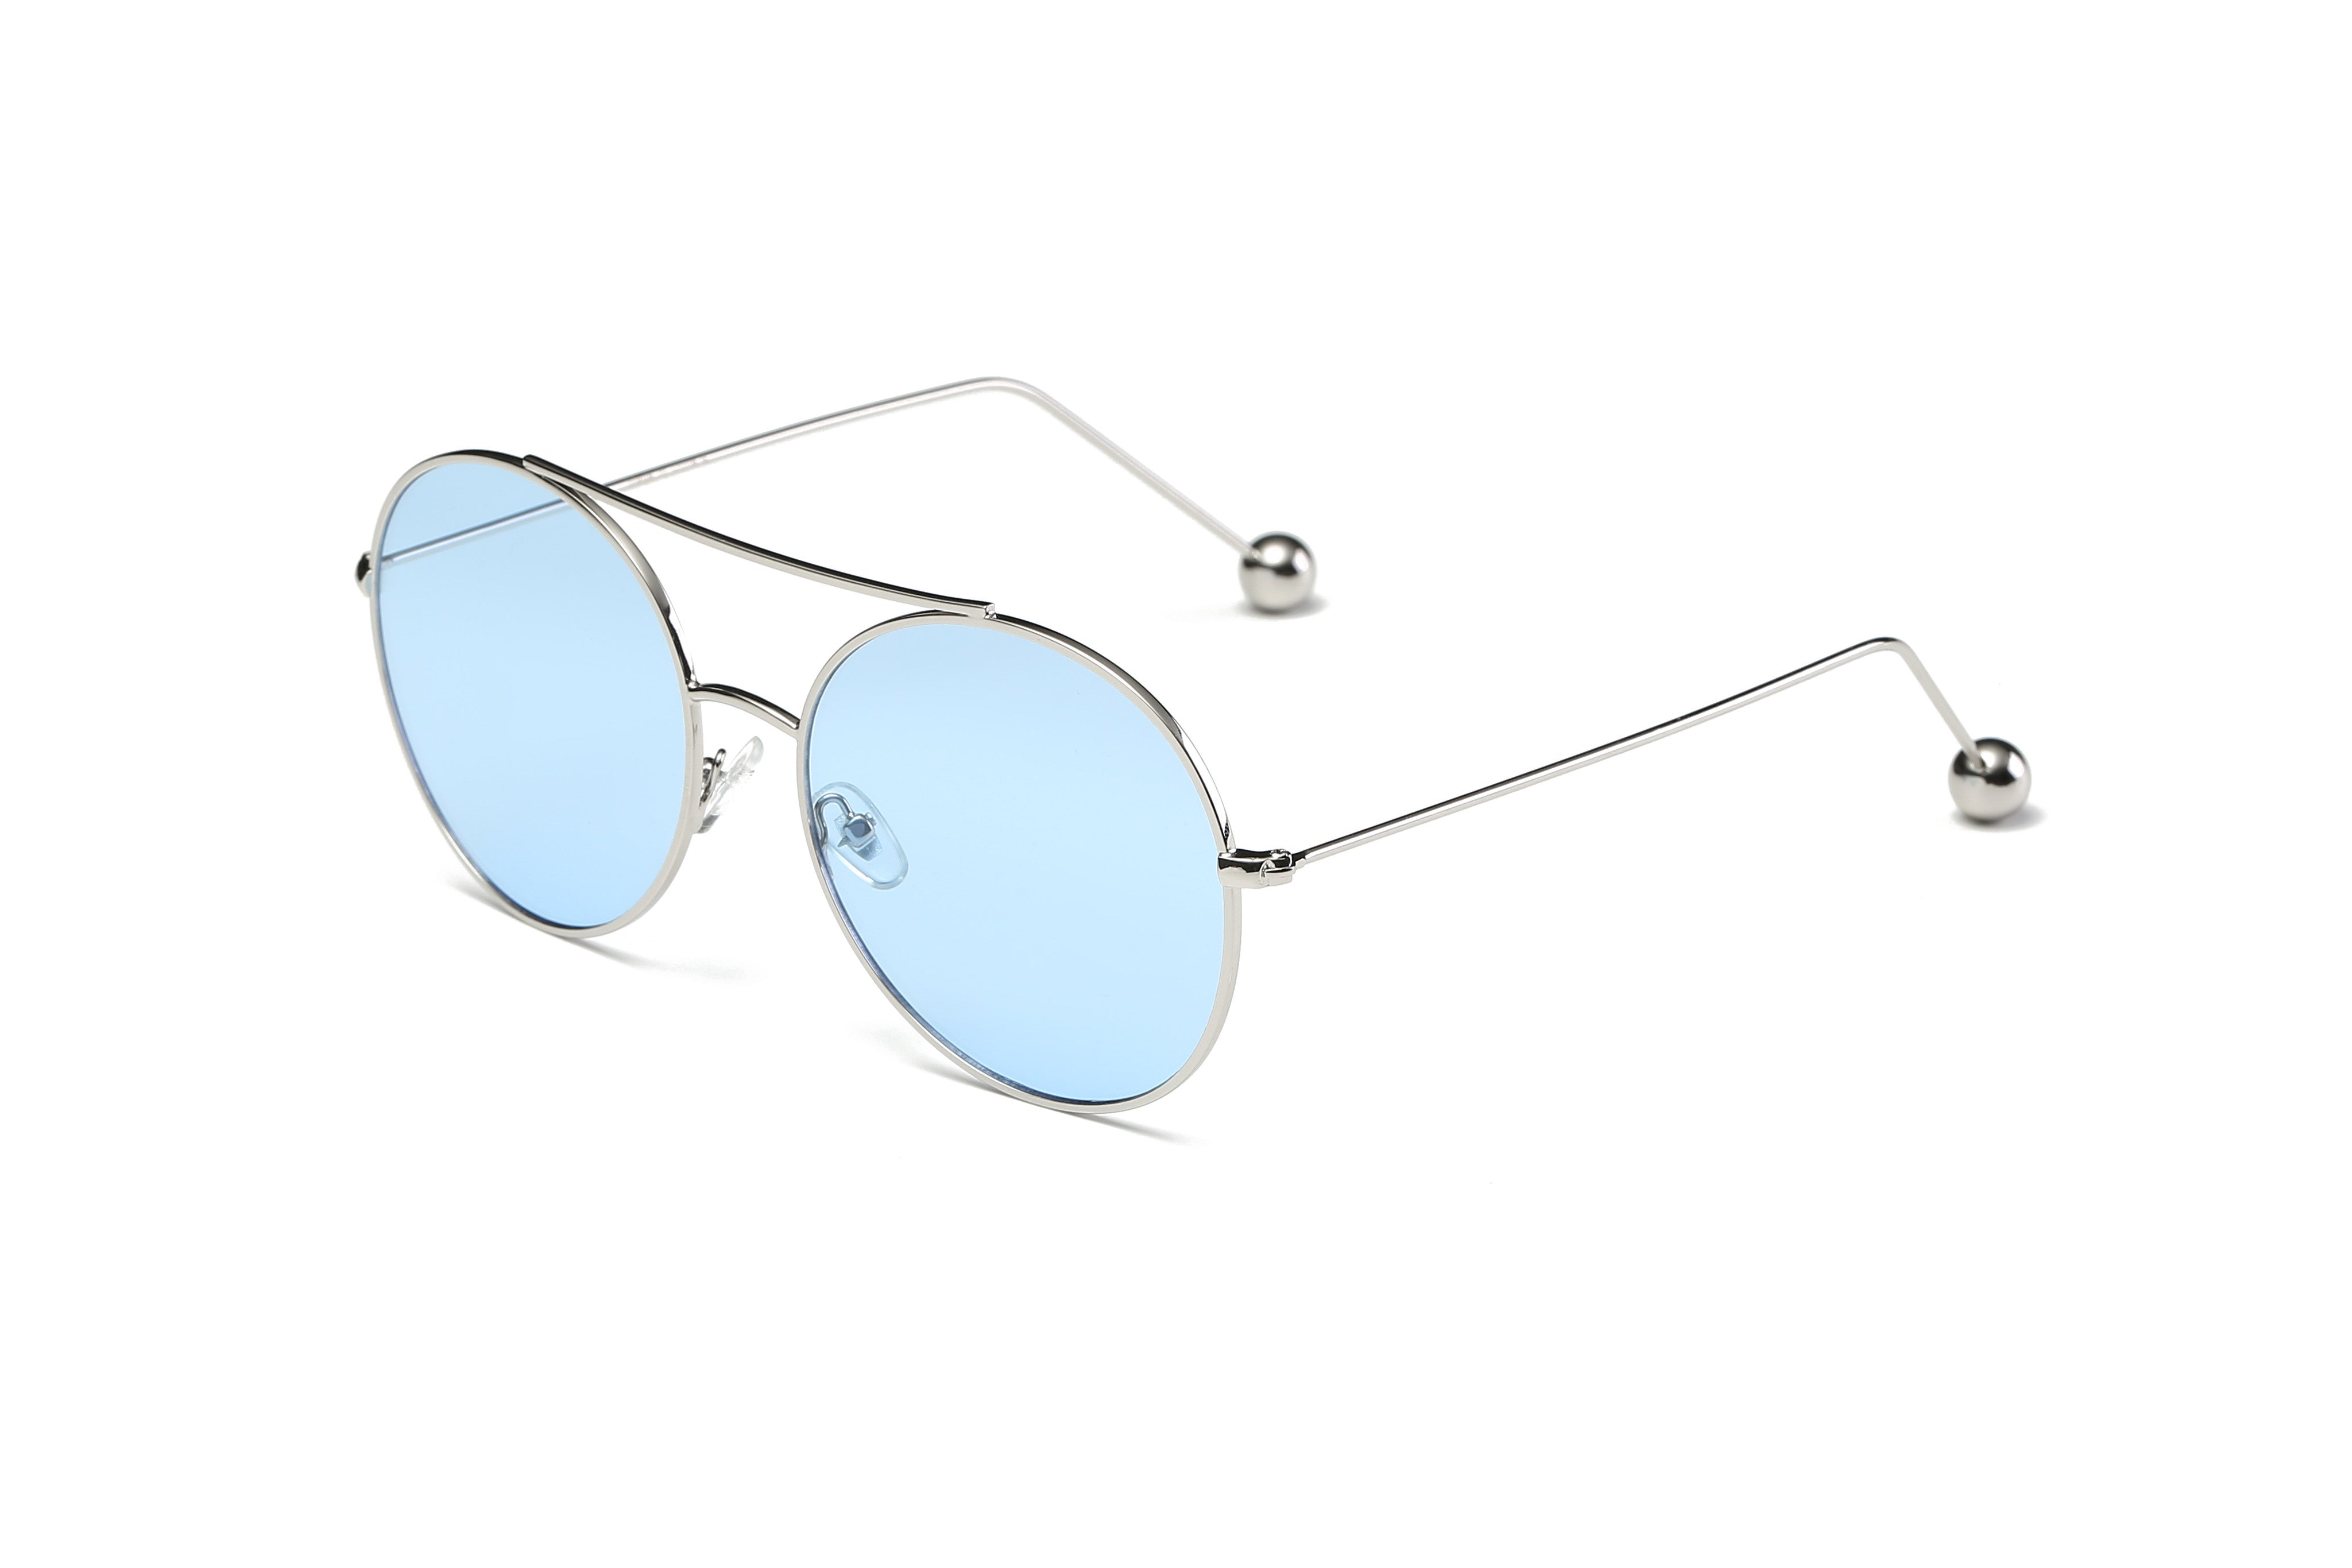 S1016 - Unisex Round Tinted Lens SUNGLASSES Blue lens with silver frame